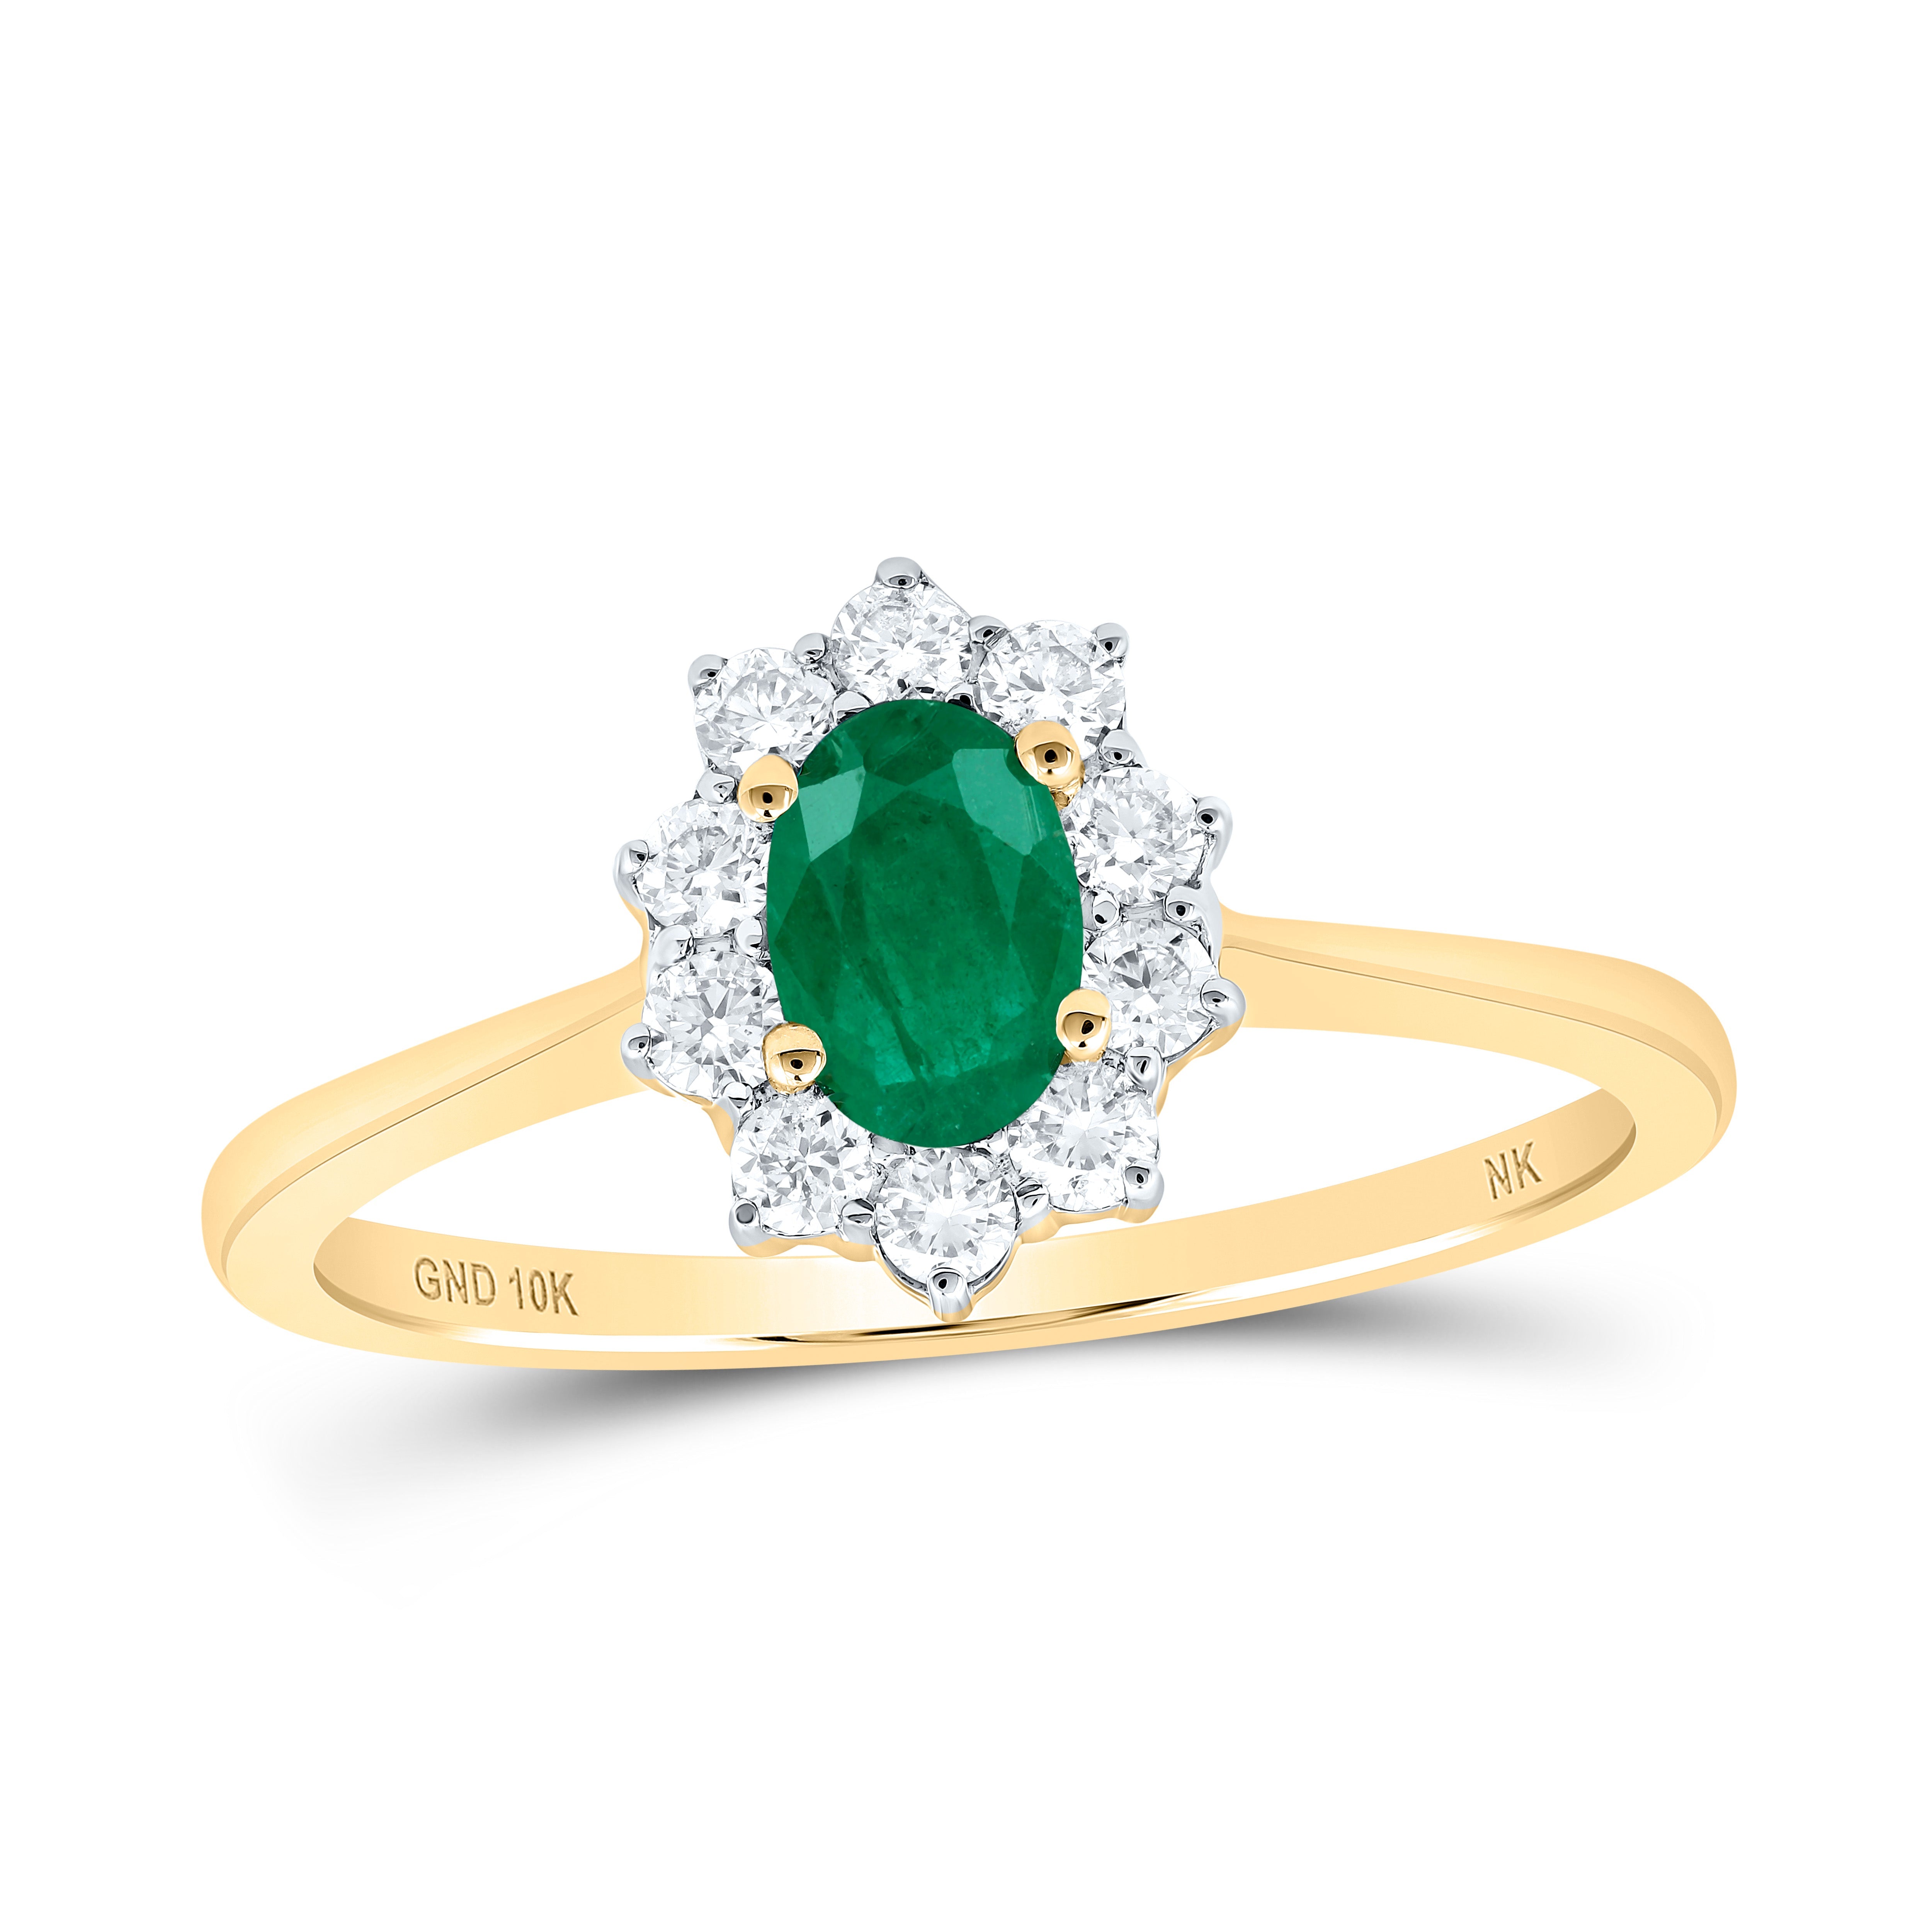 10kt Yellow Gold Womens Oval Emerald Diamond Halo Ring 5/8 Cttw